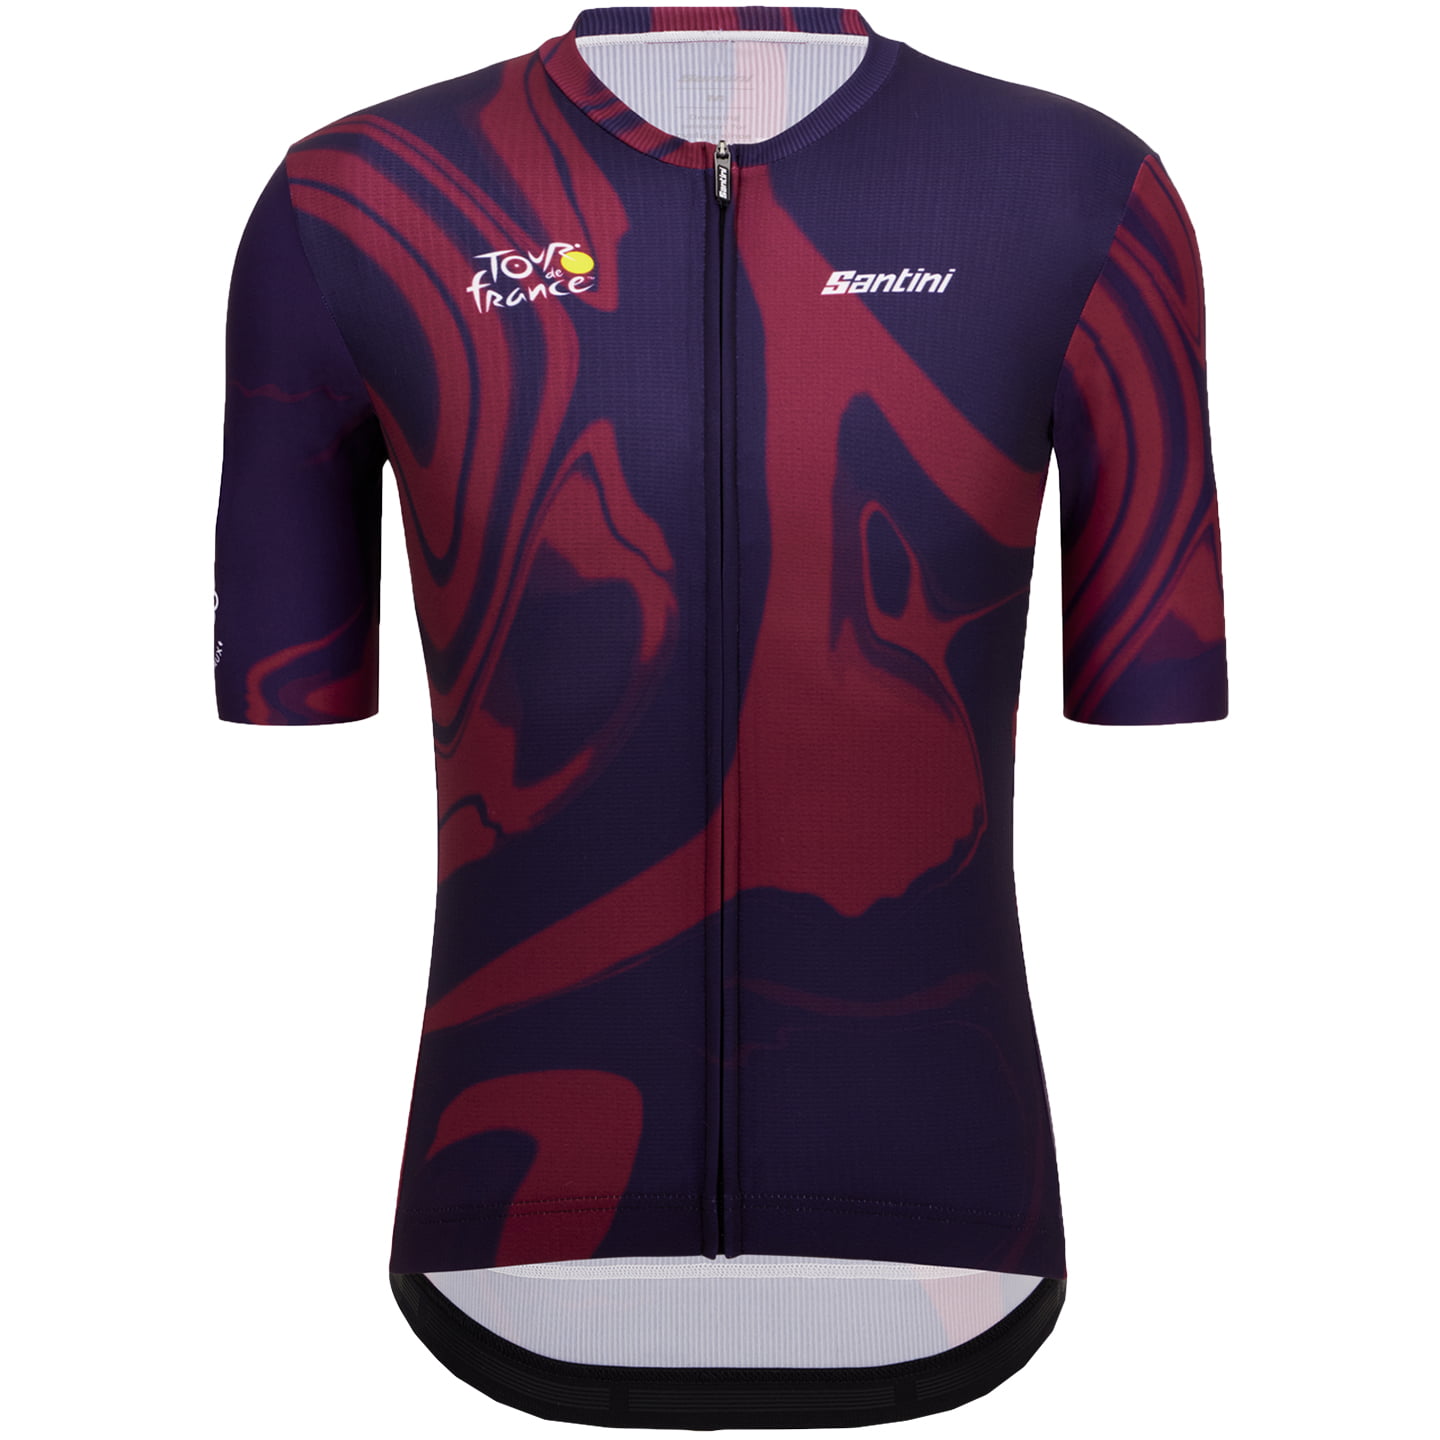 TOUR DE FRANCE Bordeaux 2023 Short Sleeve Jersey, for men, size S, Cycling jersey, Cycling clothing